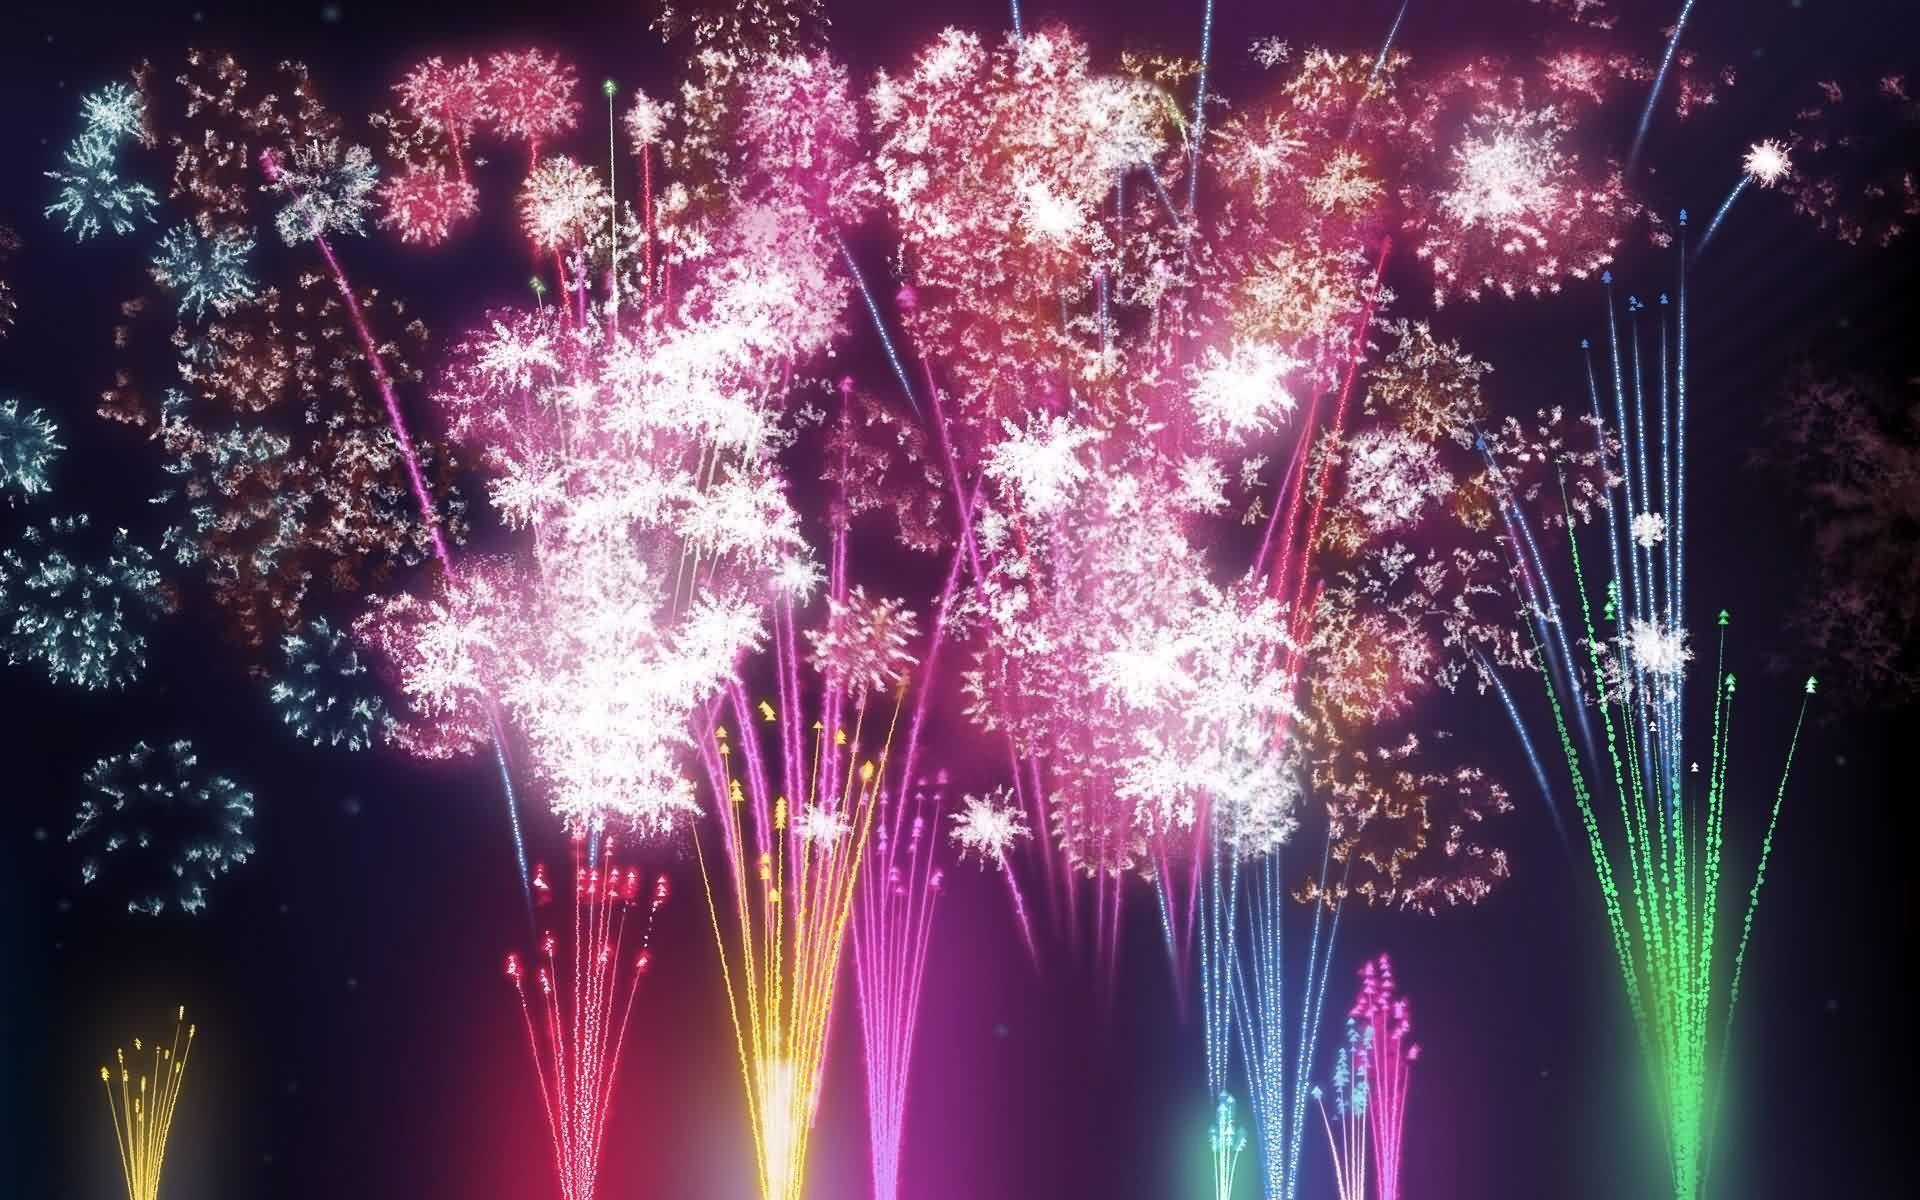 Fireworks light up the sky in a display of dazzling colors. - New Year